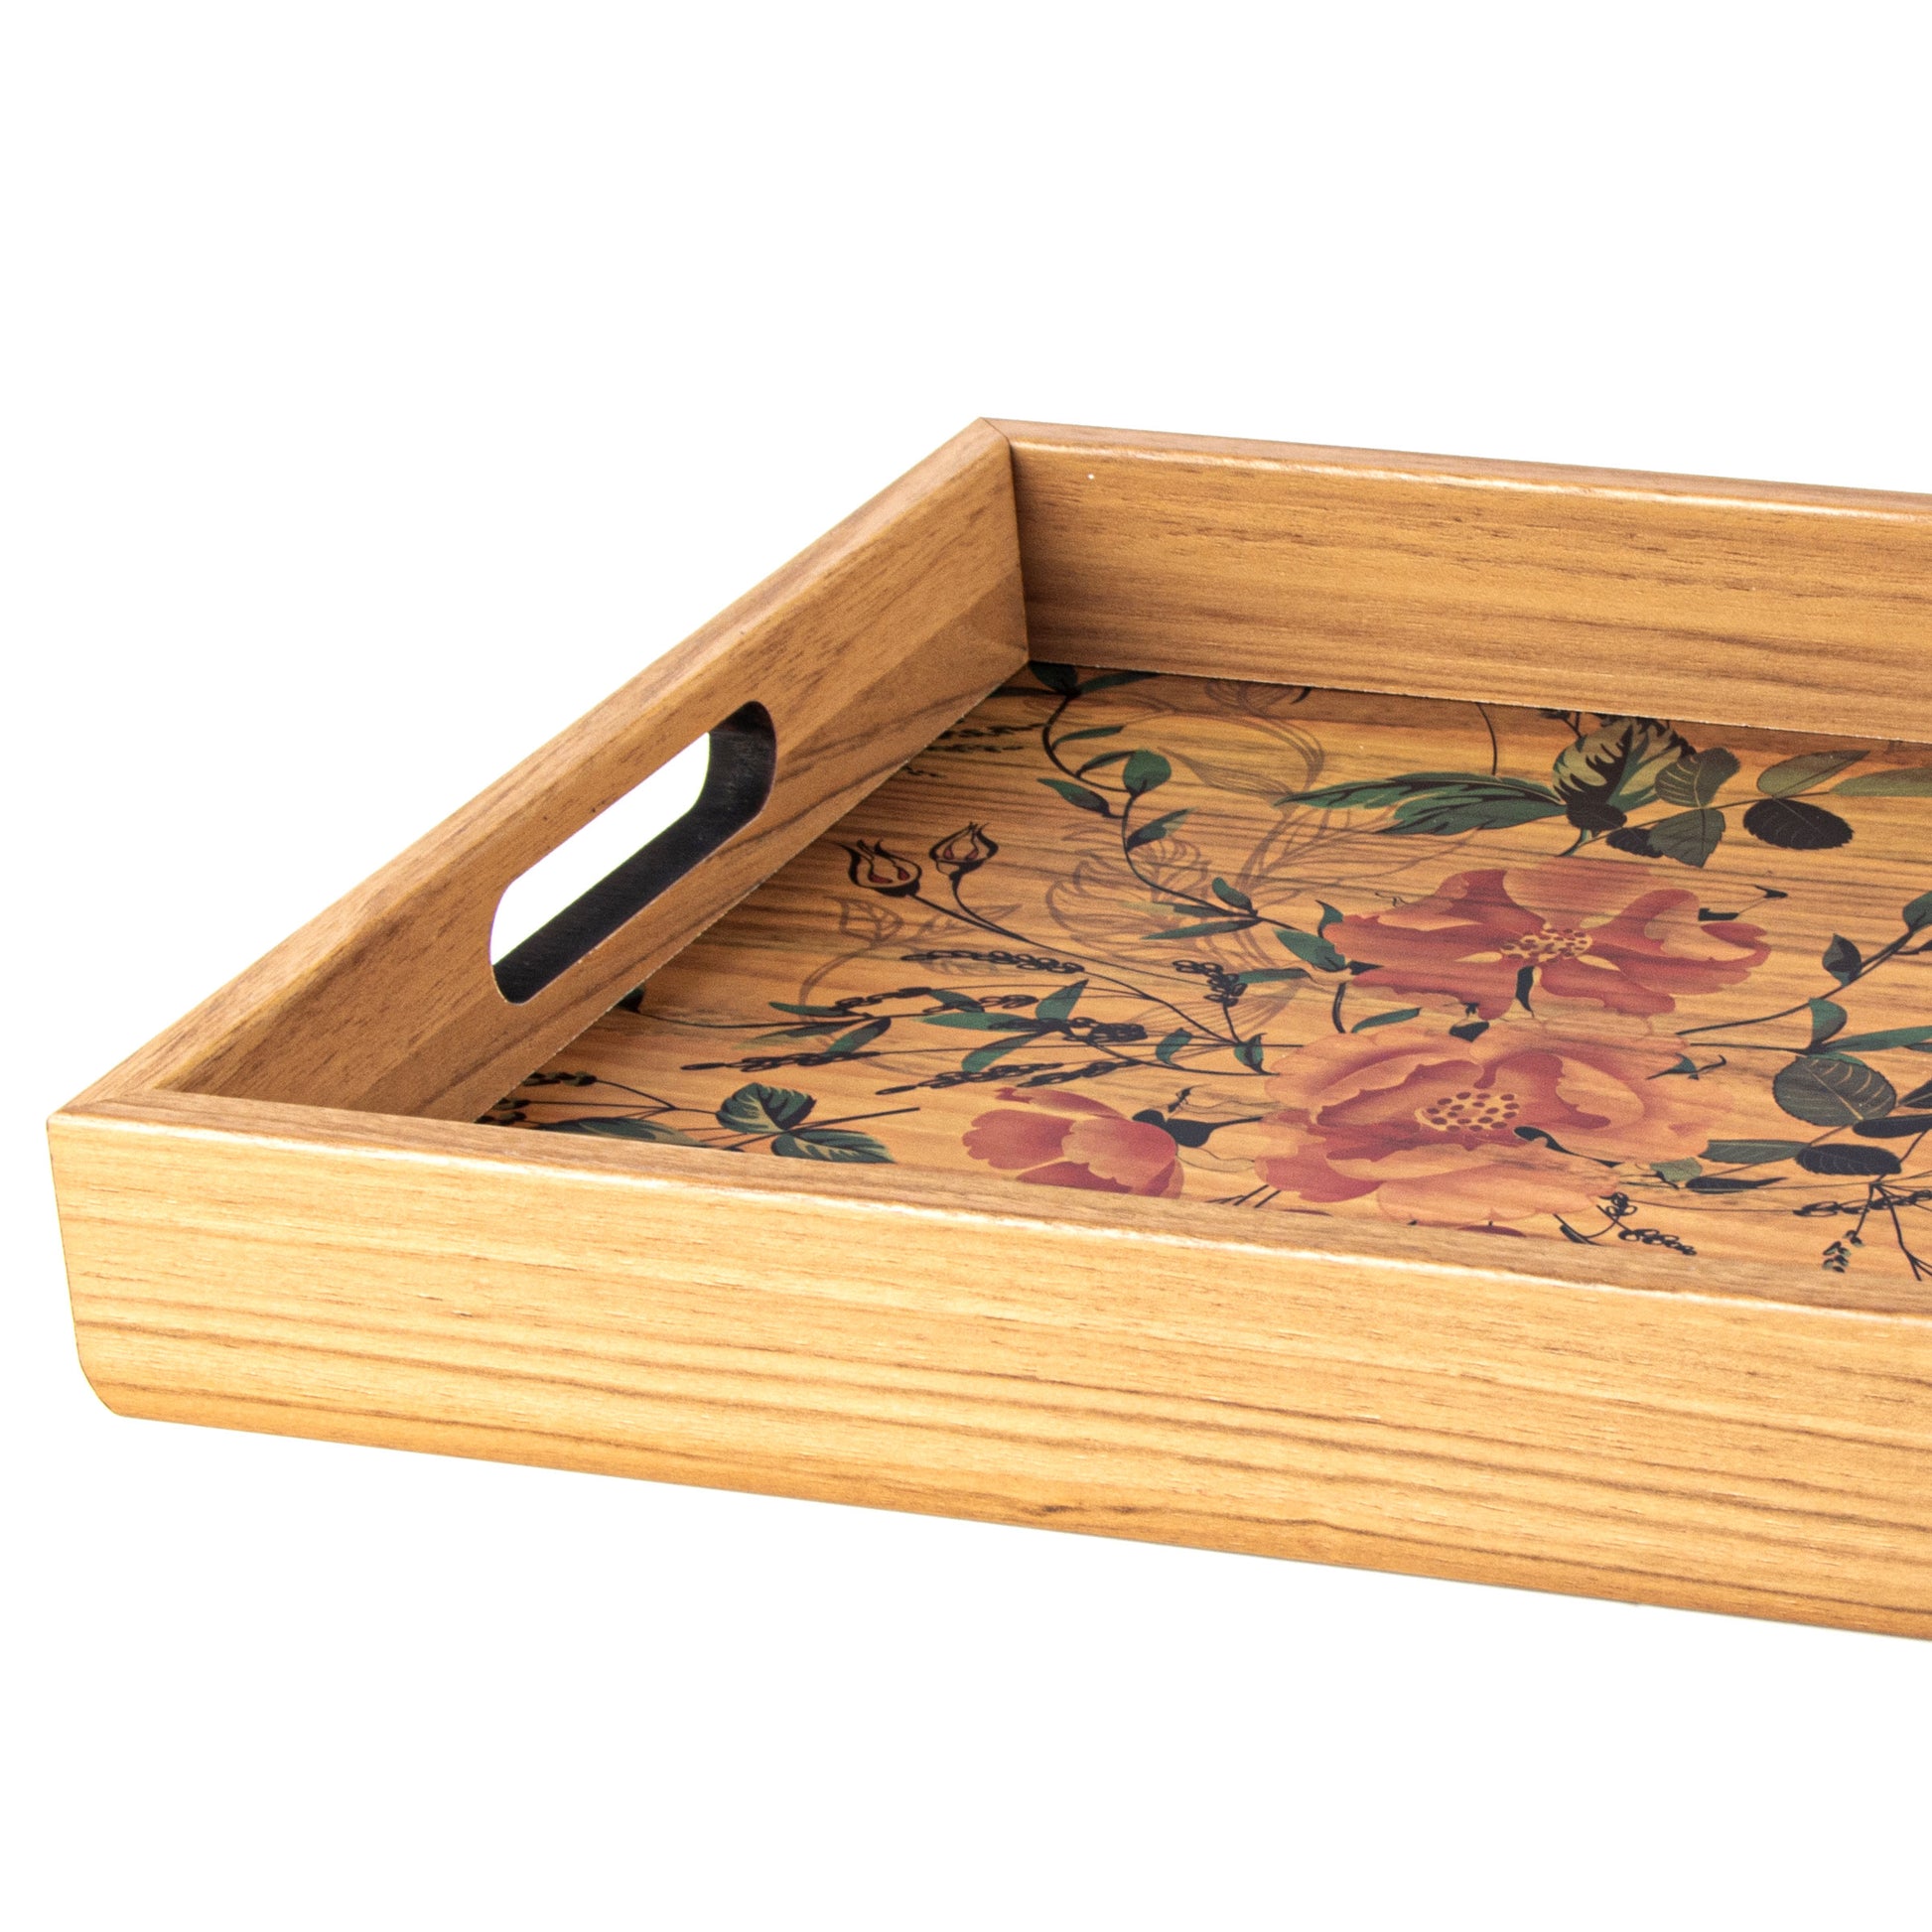 Handcrafted Wooden Tray with Floral Design - Elegant Artistic Home Decor - Premium Decorative Objects from MANOPOULOS Chess & Backgammon - Just €25! Shop now at MANOPOULOS Chess & Backgammon